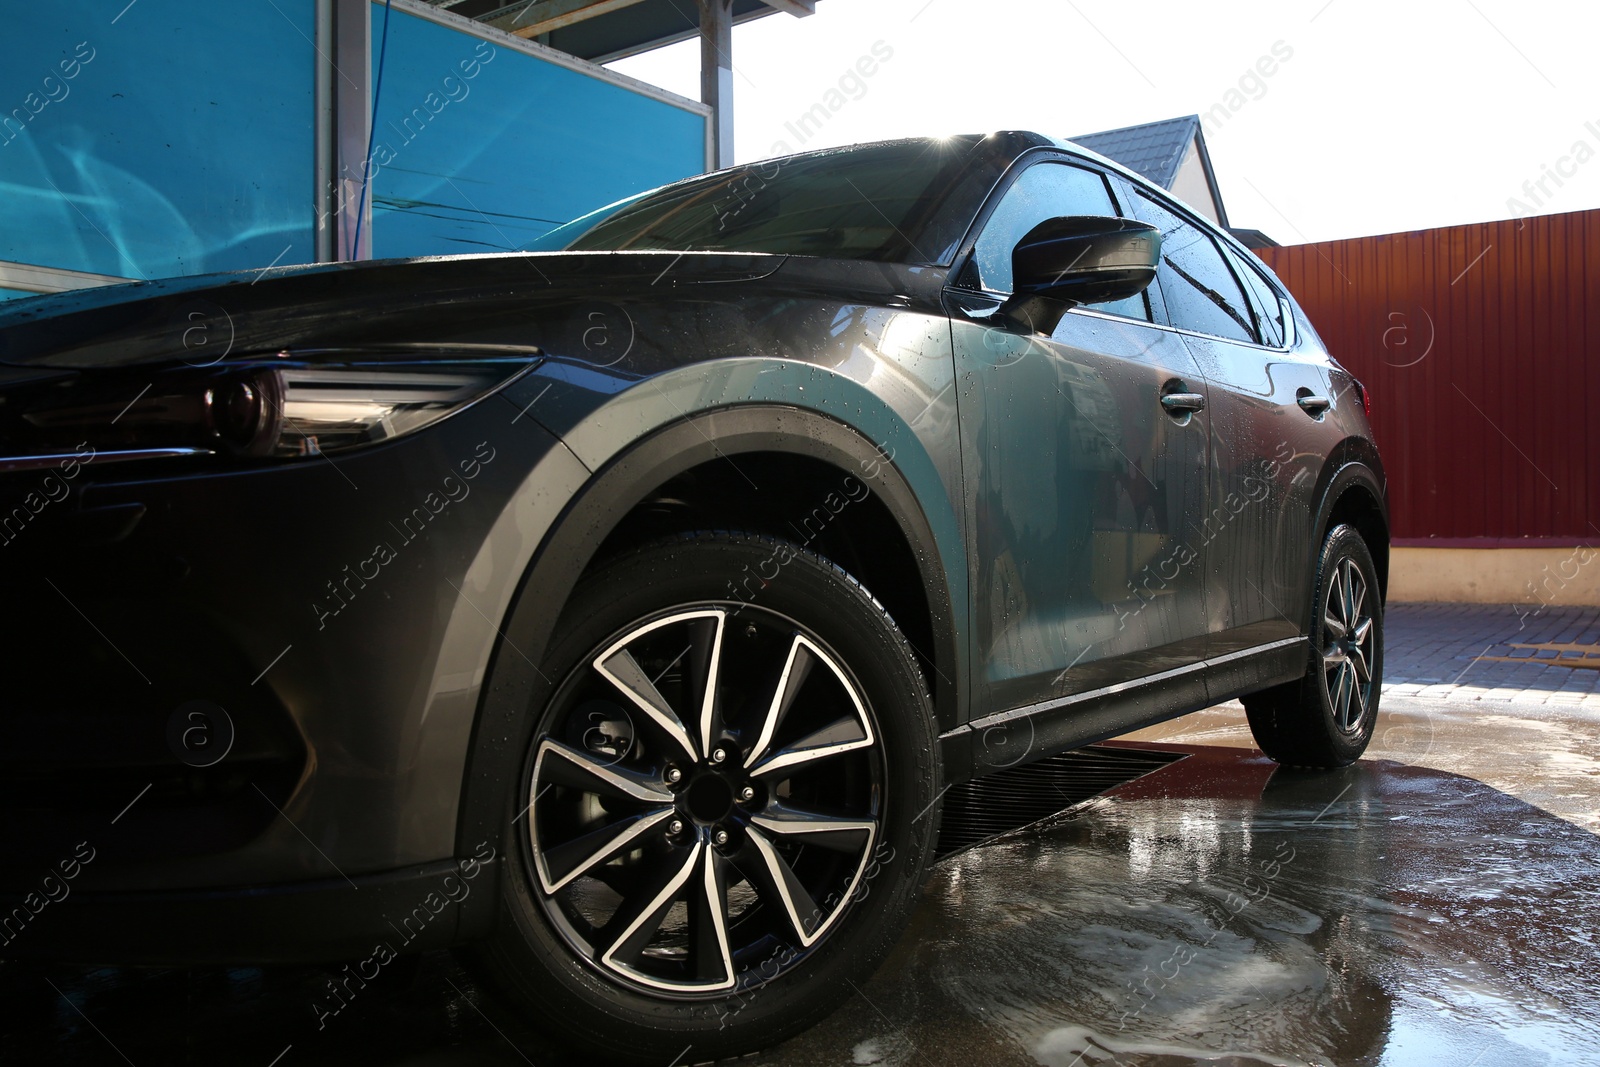 Photo of Clean wet automobile at professional car wash